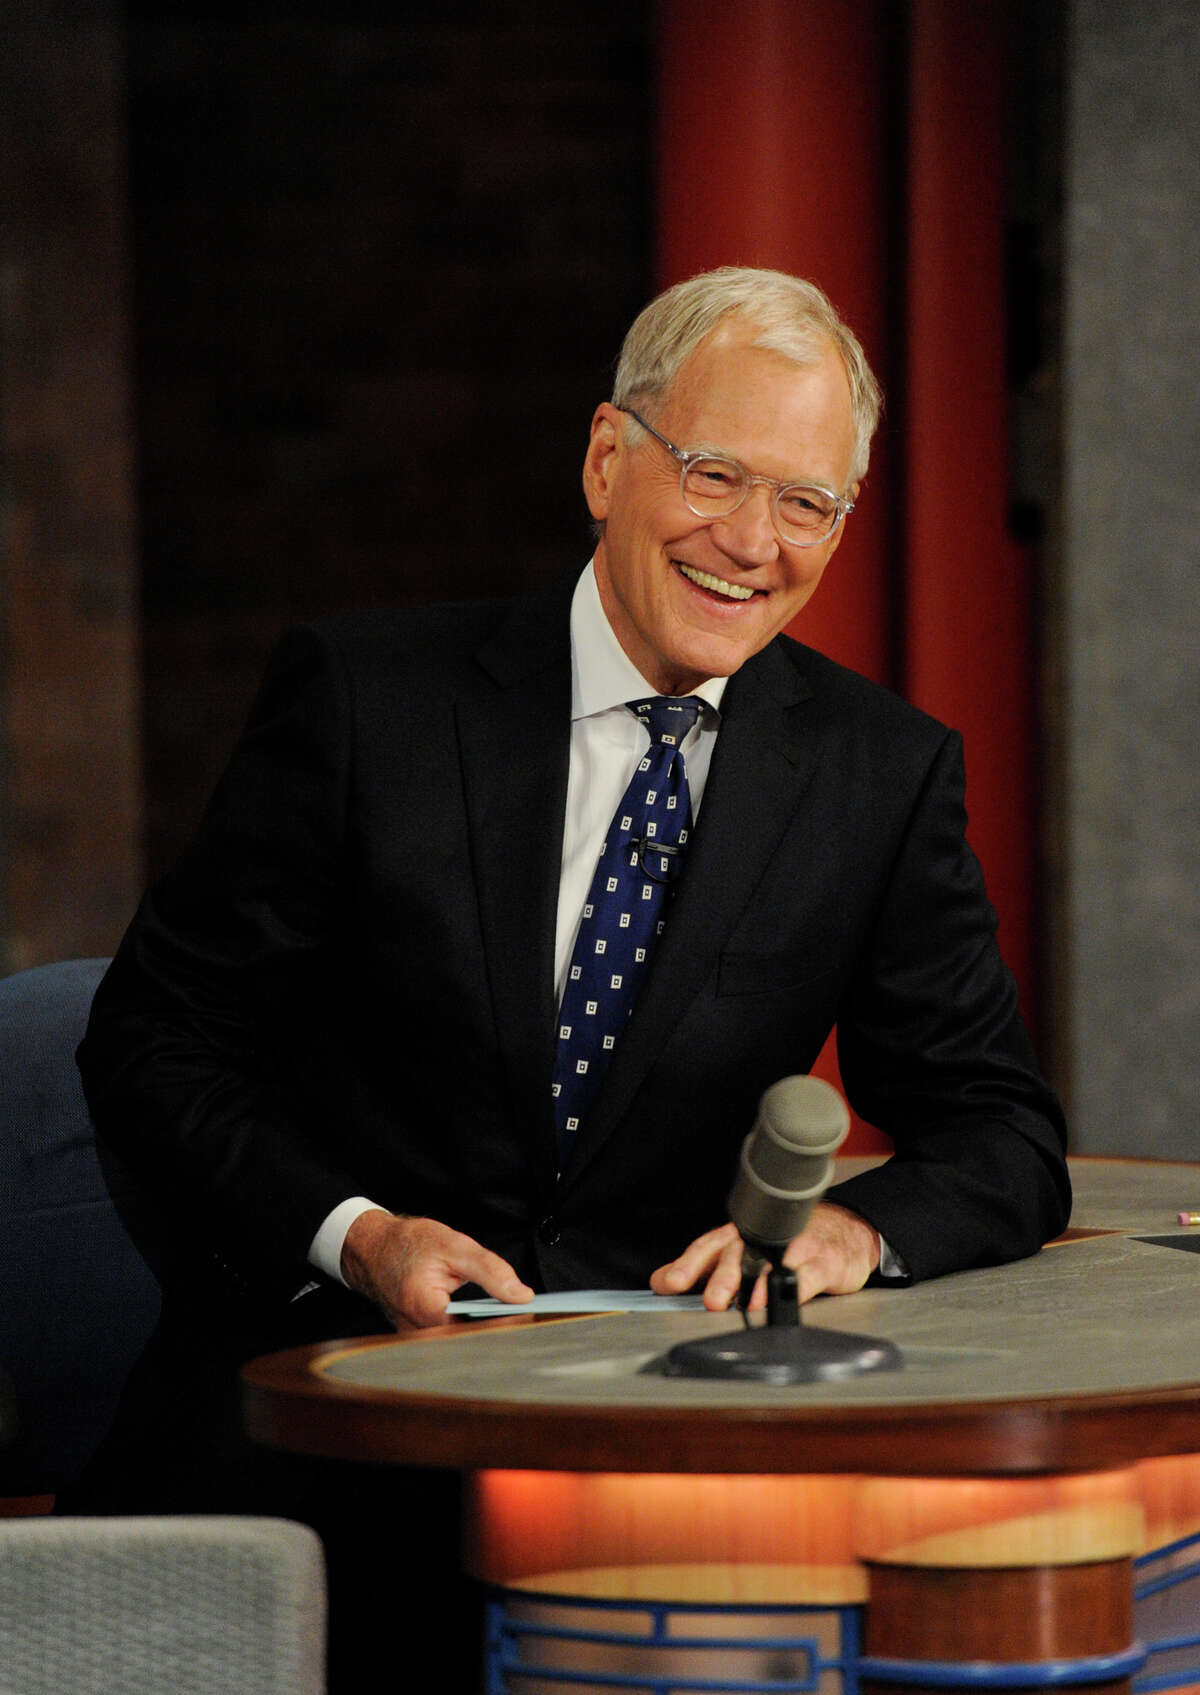 In this image released by CBS, David Letterman appears during a taping of his final "Late Show with David Letterman," Wednesday, May 20, 2015 at the Ed Sullivan Theater in New York. After 33 years in late night television, 6,028 broadcasts, nearly 20,000 total guest appearances, 16 Emmy Awards and more than 4,600 career Top Ten Lists, David Letterman has retired.